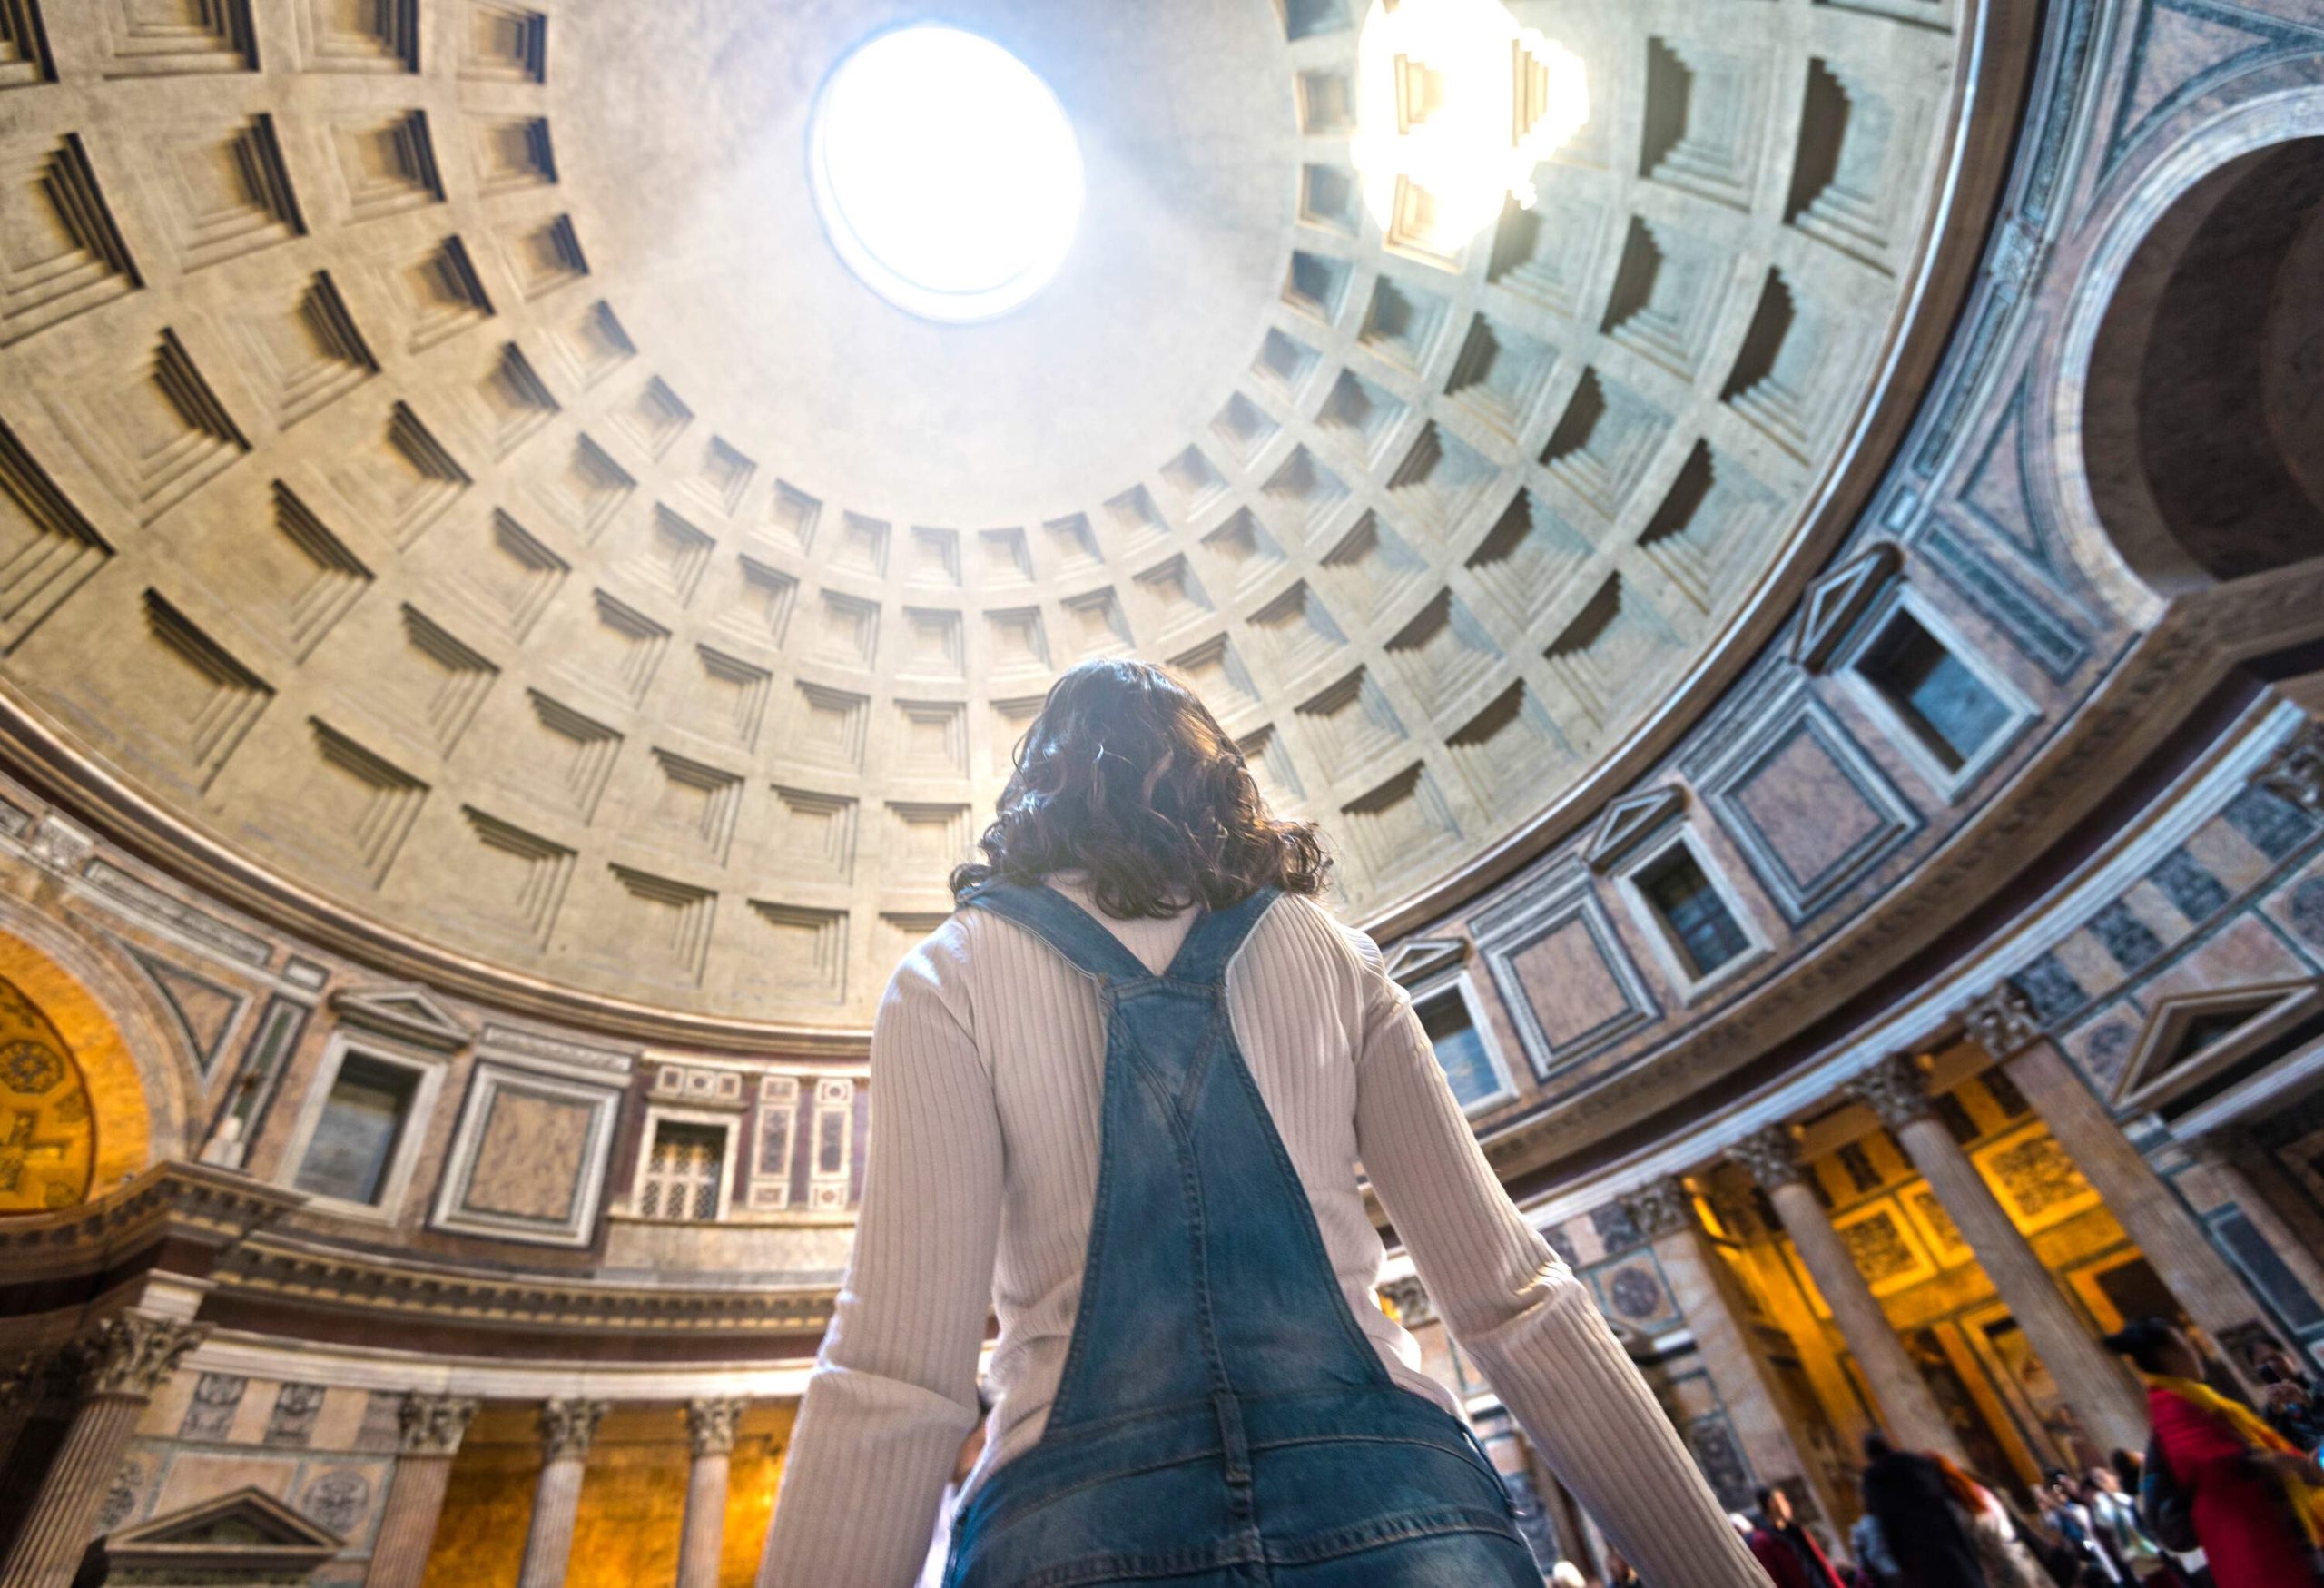 A woman is standing inside a building with a coffered dome with light passing through the central oculus.